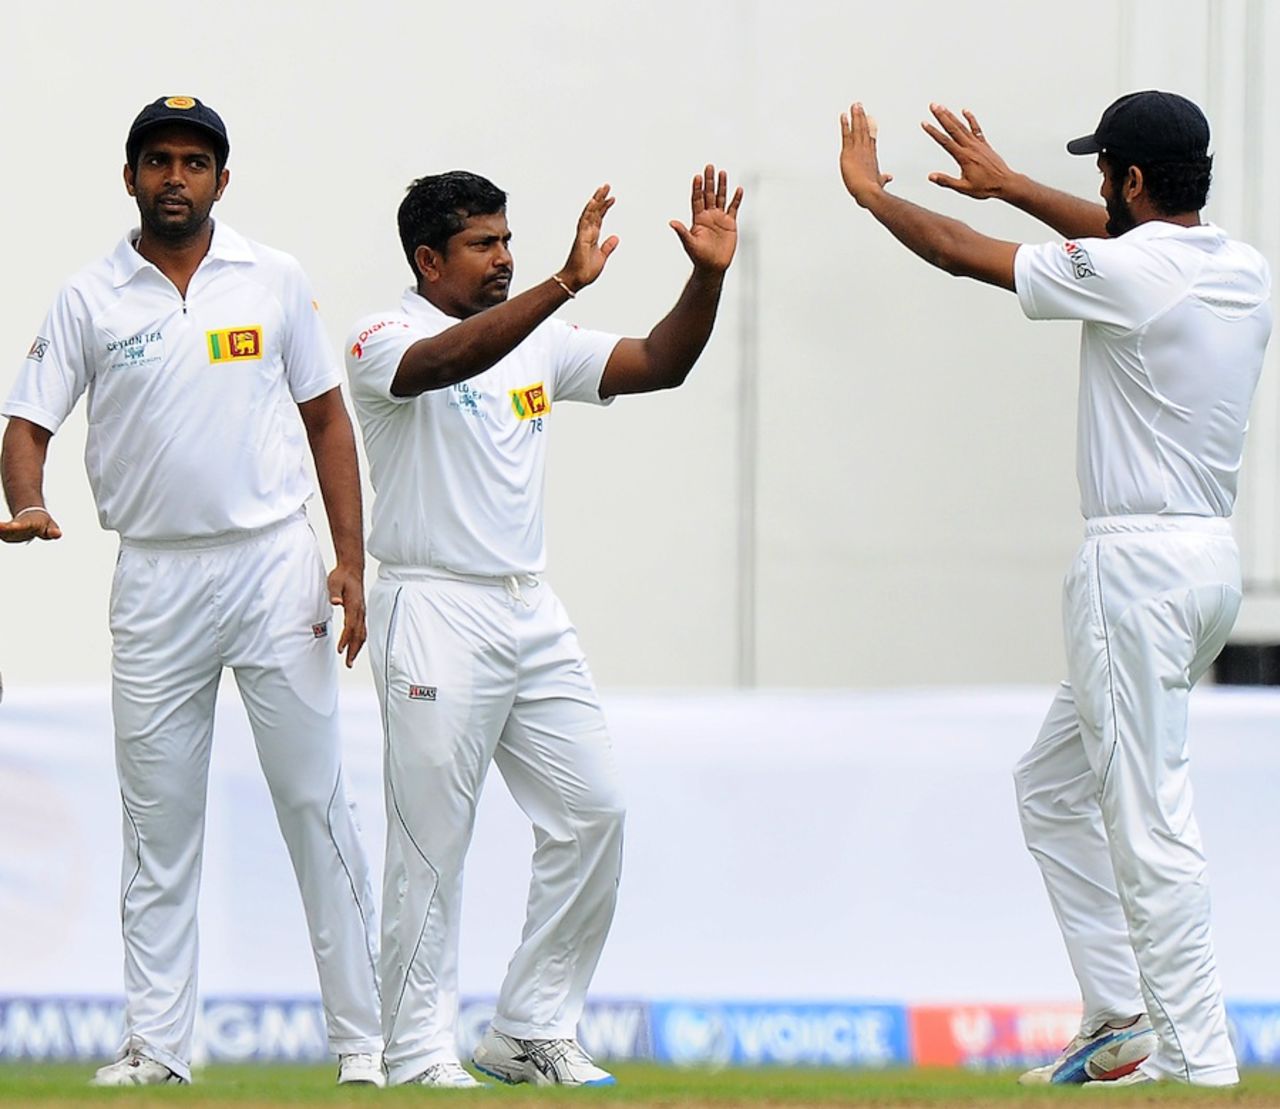 Rangana Herath completed his five-for, Pakistan v Sri Lanka, 3rd Test, Sharjah, 4th day, January 19, 2014